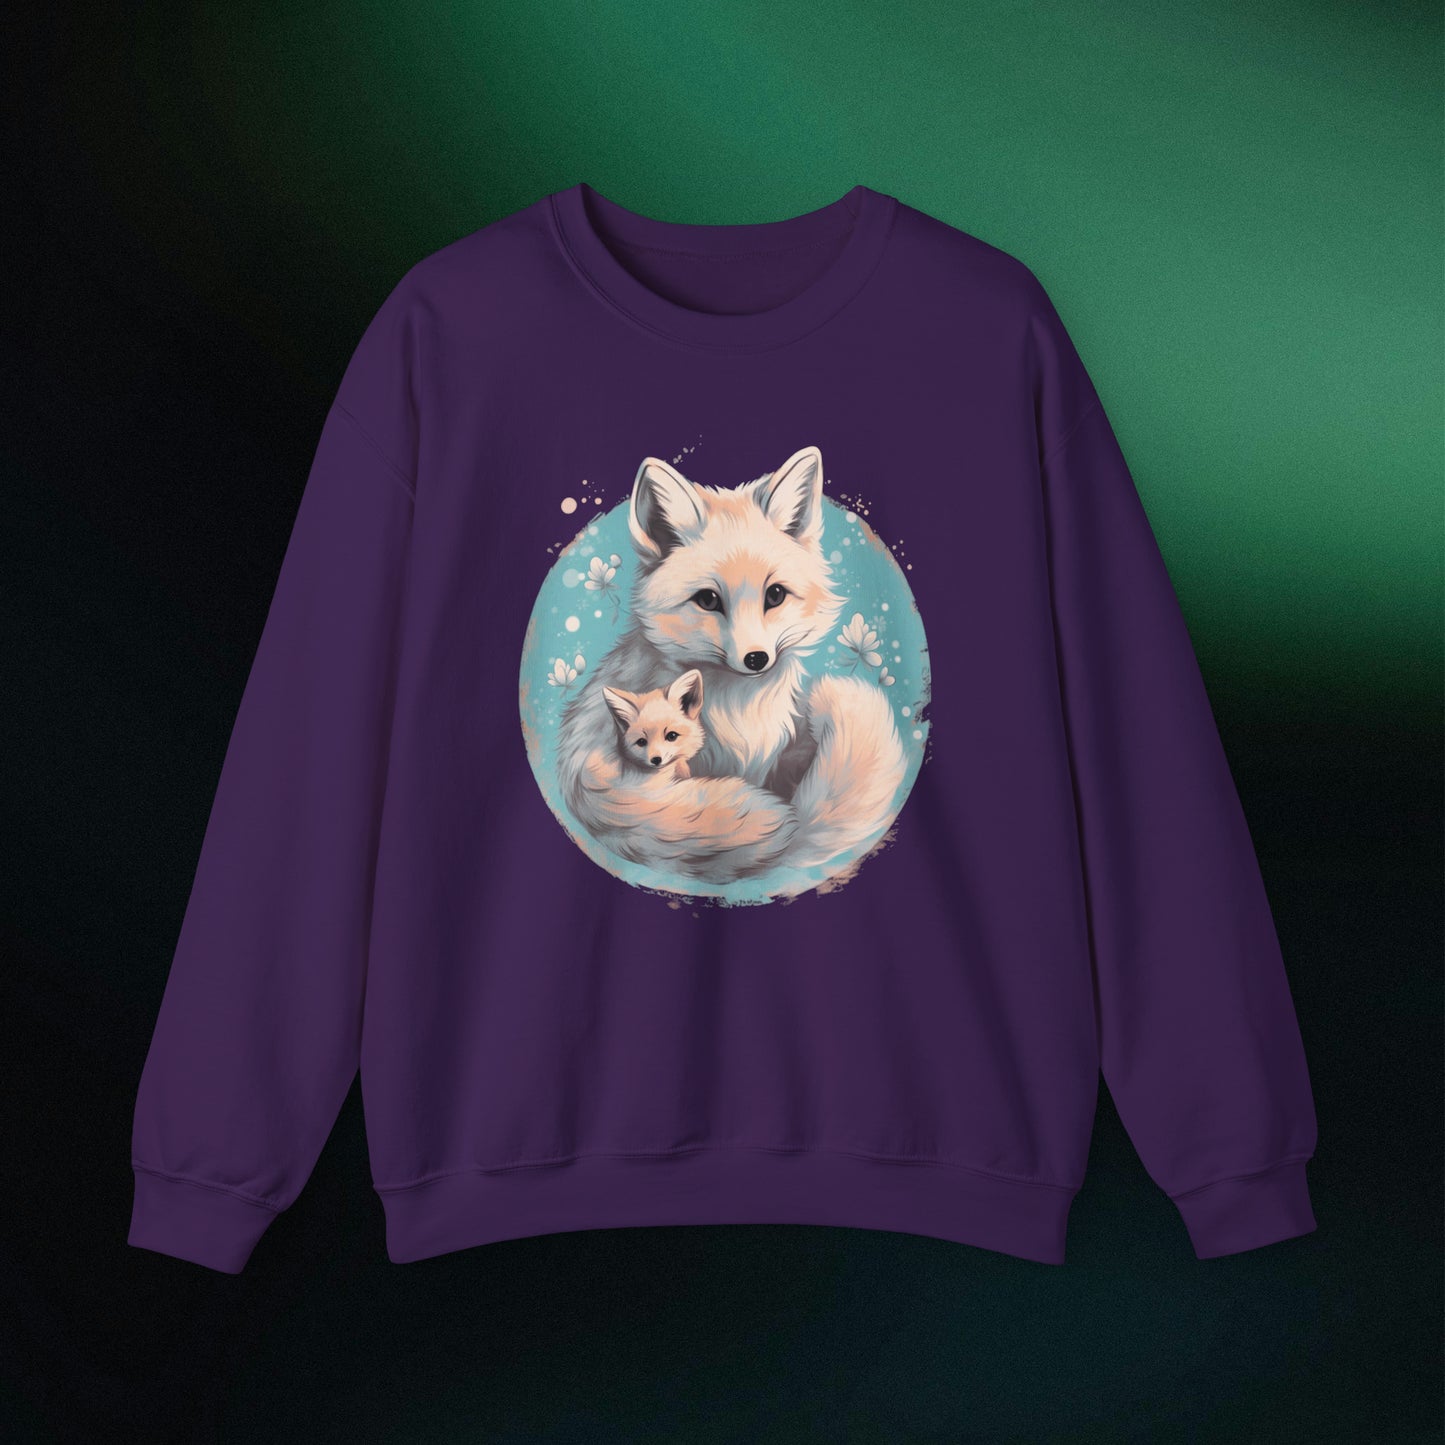 Vintage Forest Witch Aesthetic Sweatshirt - Cozy Fox Cottagecore Sweater with Mommy and Baby Fox Design Sweatshirt S Purple 